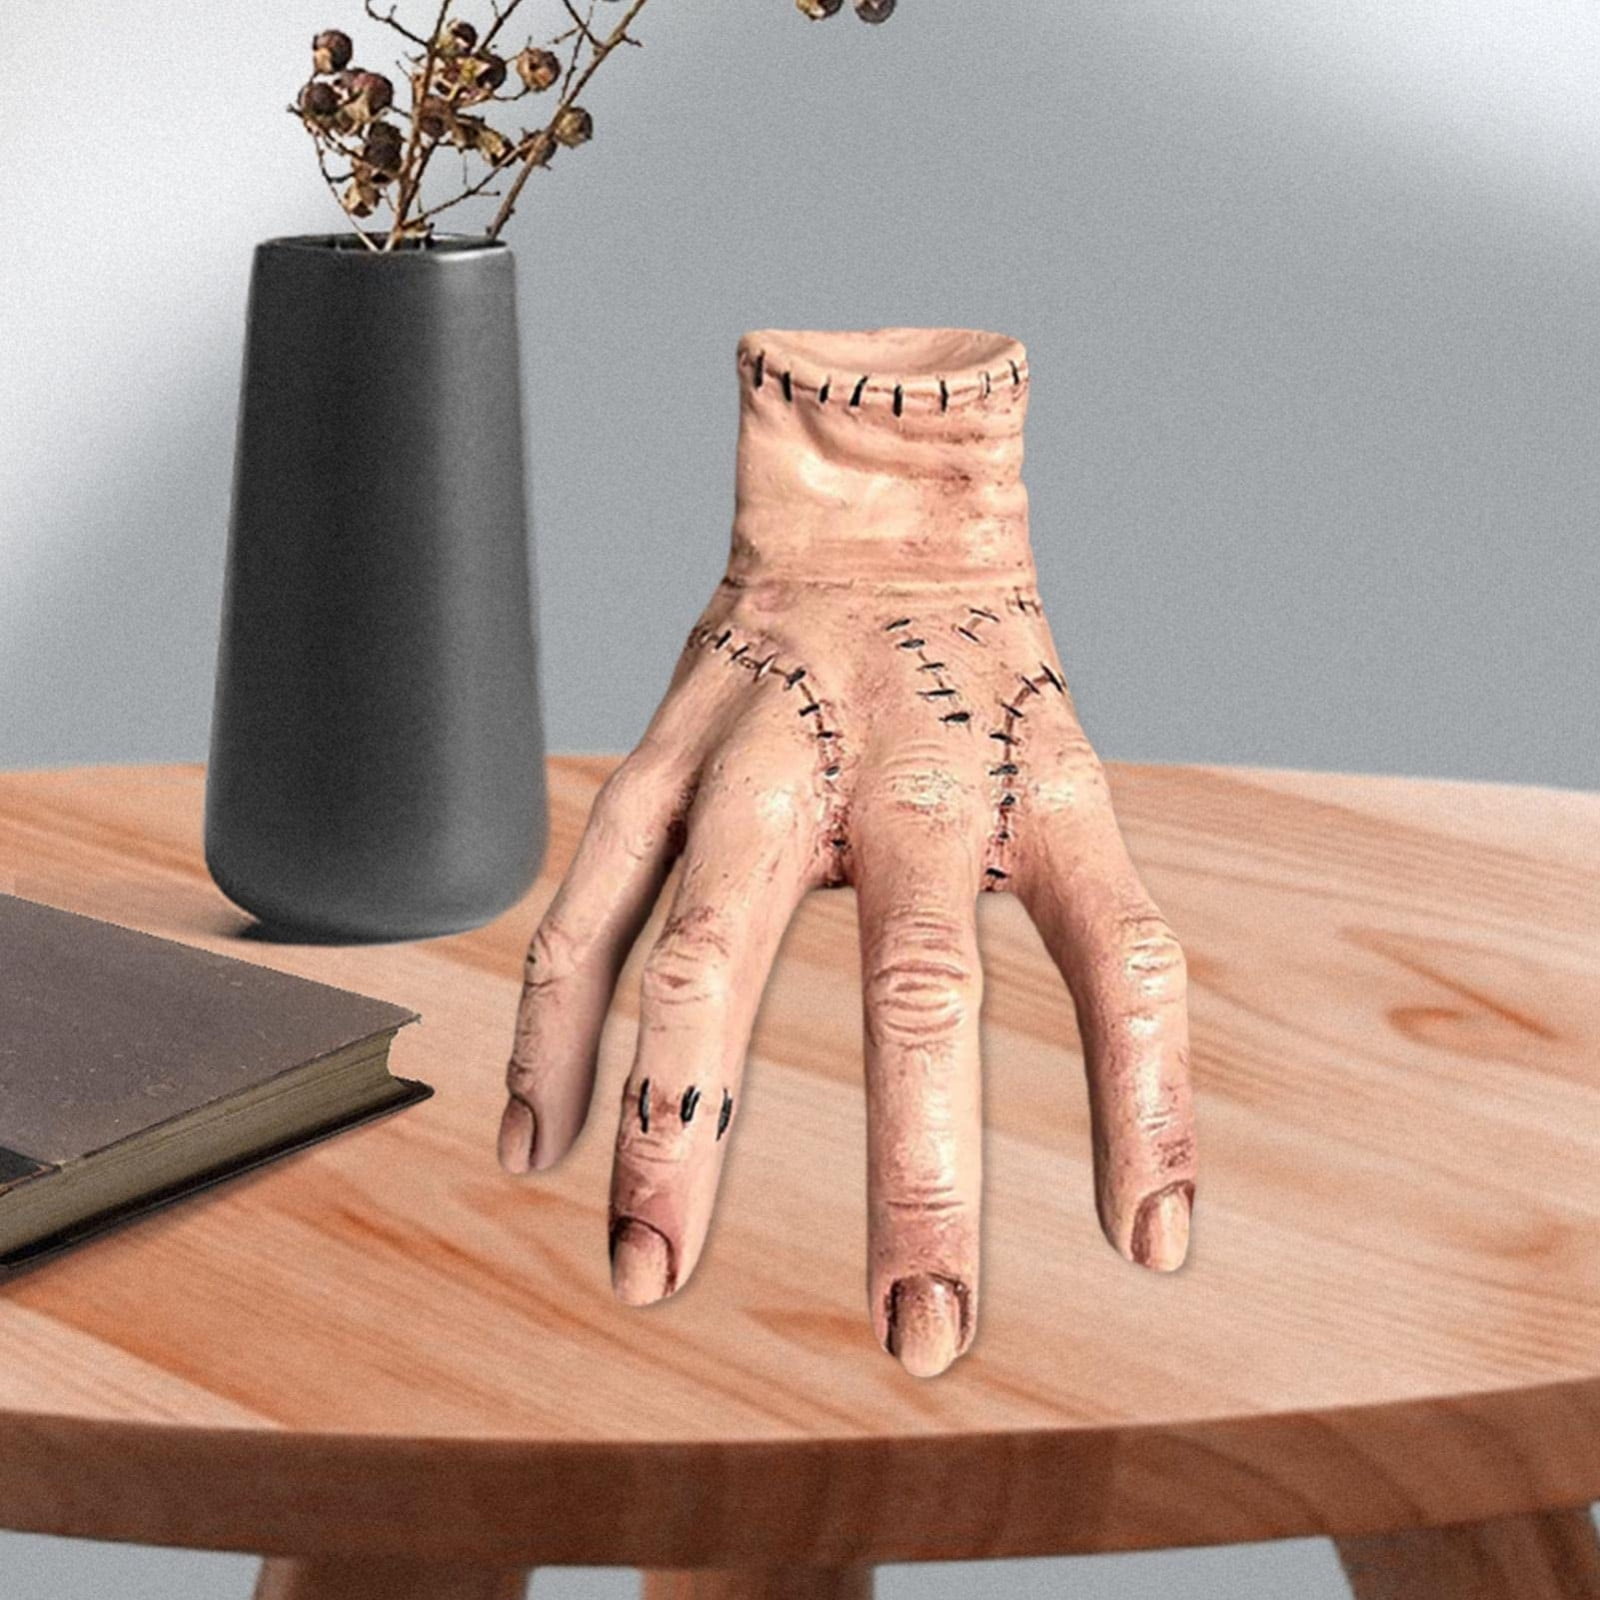 Wednesday Addams Family Thing Hand,Realistic Scarred Latex Palm Horror Prop  Decoration,Adams Family Cosplay Hand,Suitable As A Gift for A Friend,Funny